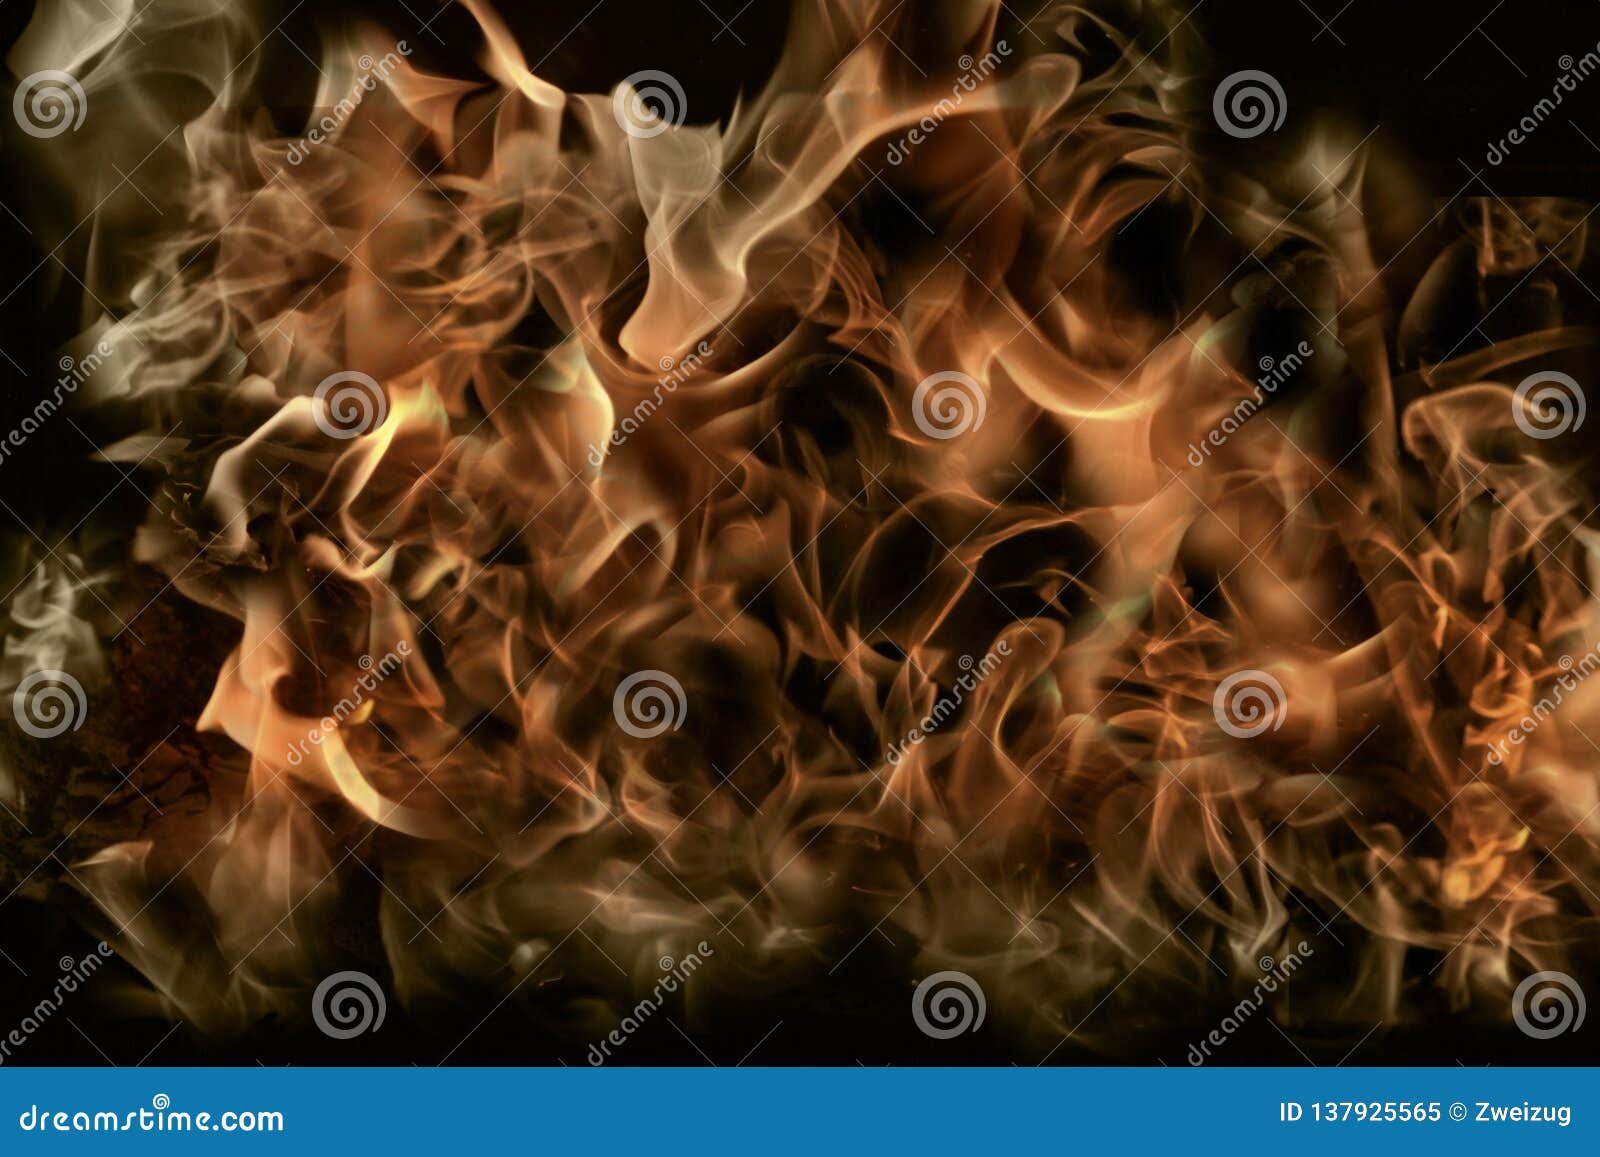 hellish flame fire conceptual abstract texture background